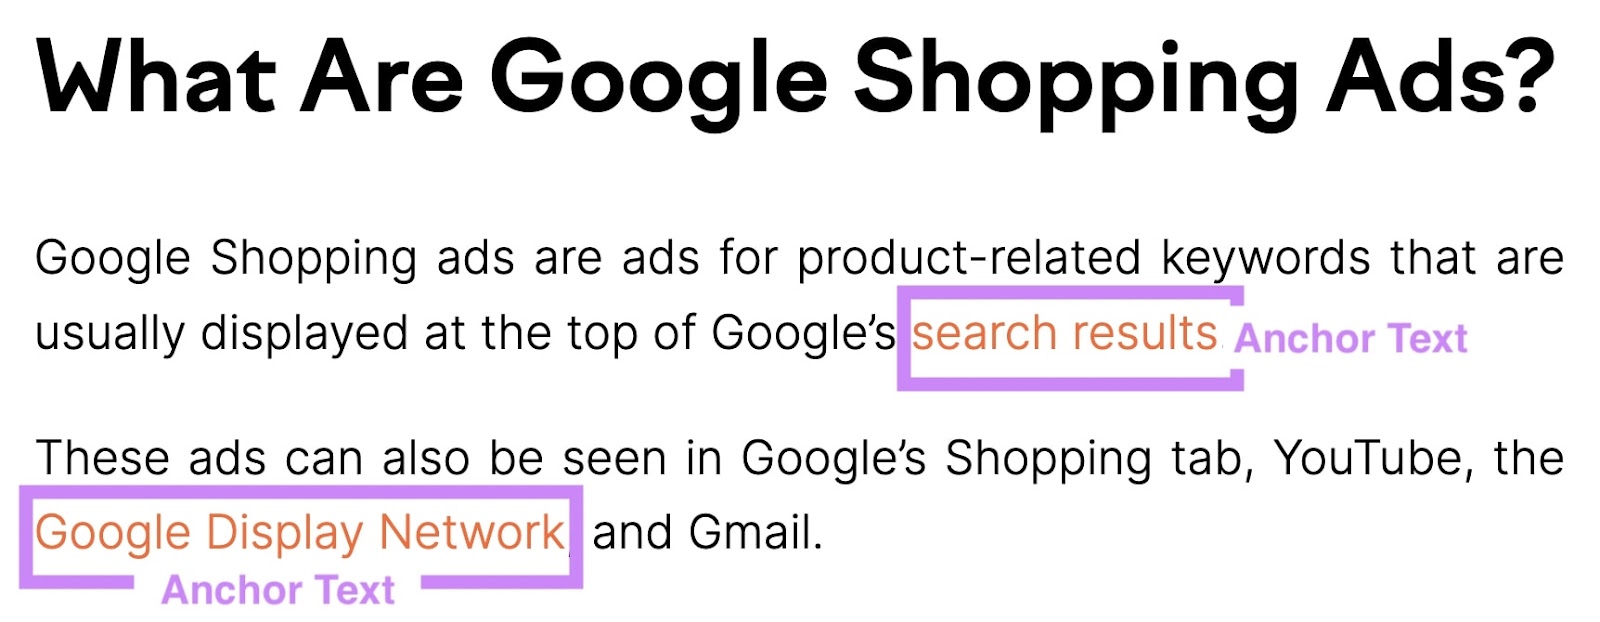 An example of links with "search results" and "Google Display Network" as anchor text